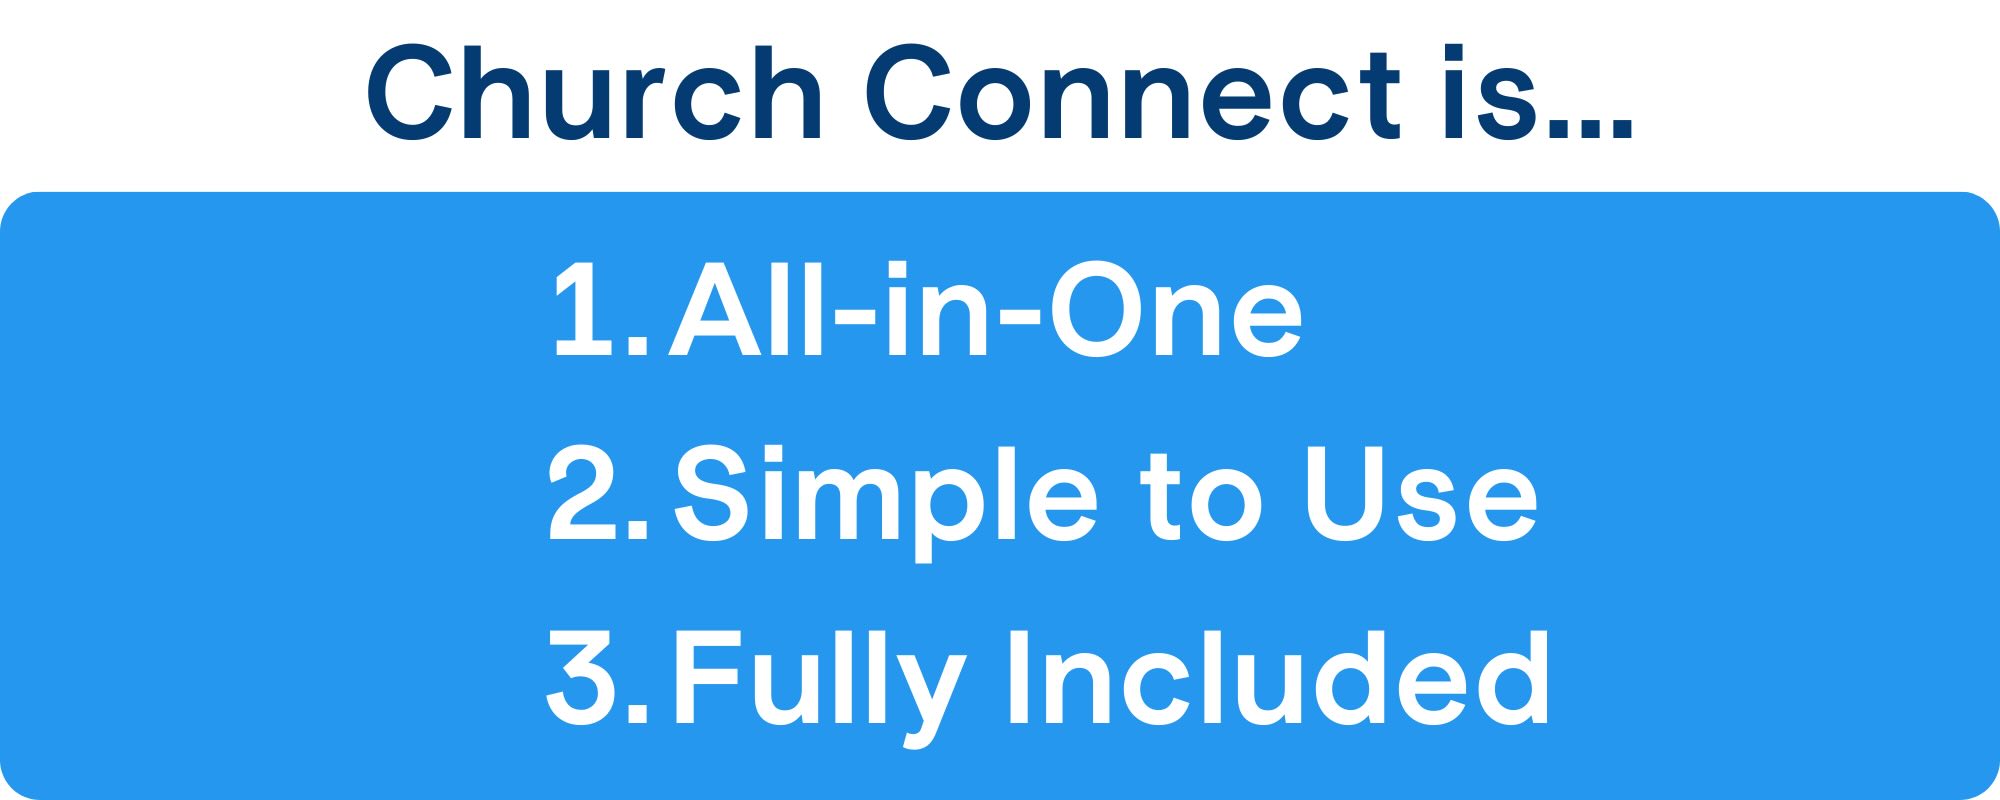 What makes the Church Connect church website, church app, and member portal different from all the others